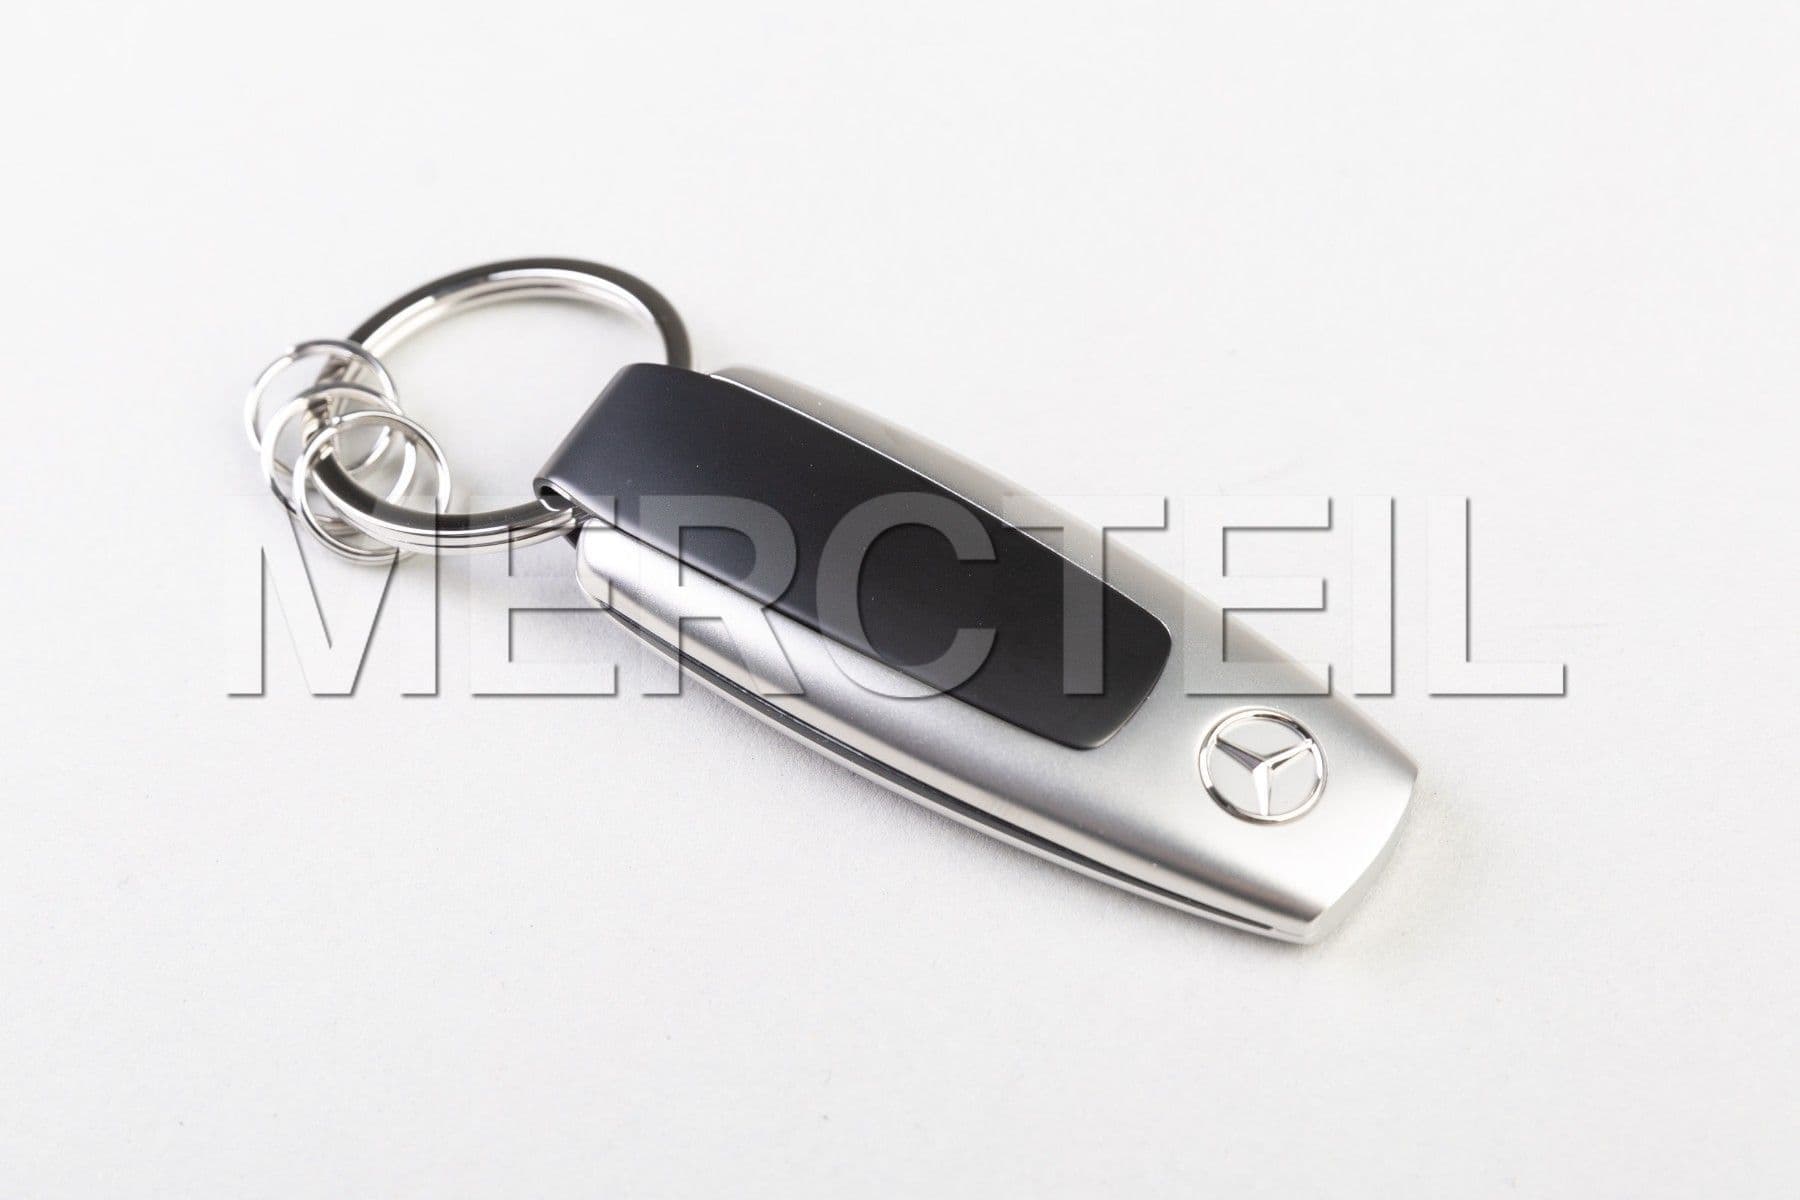 Mercedes E Class Keyring Genuine Mercedes Benz Collection (part number: B66958417)